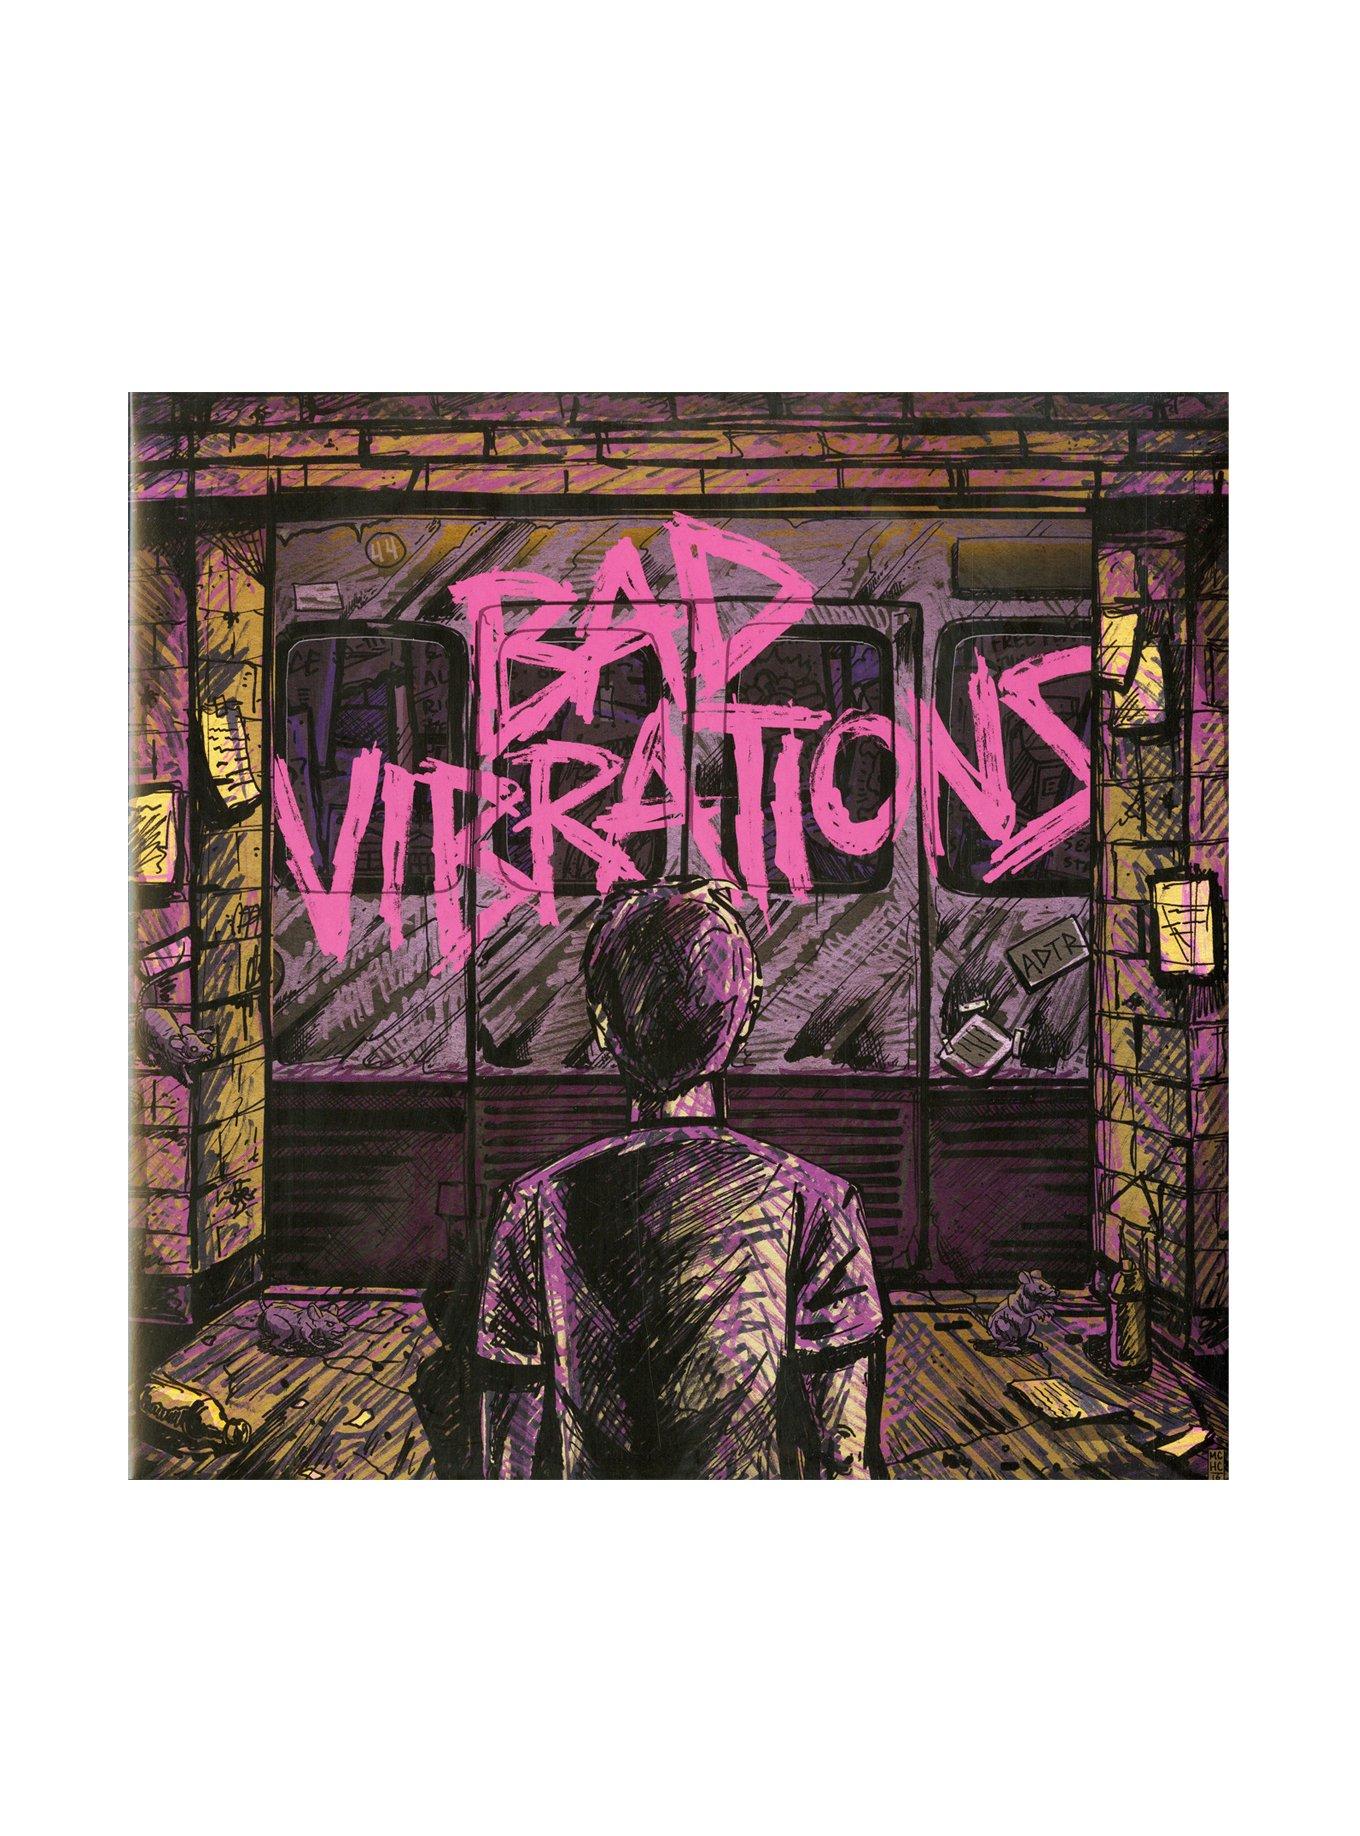 A Day To Remember - Bad Vibrations Deluxe CD, , hi-res